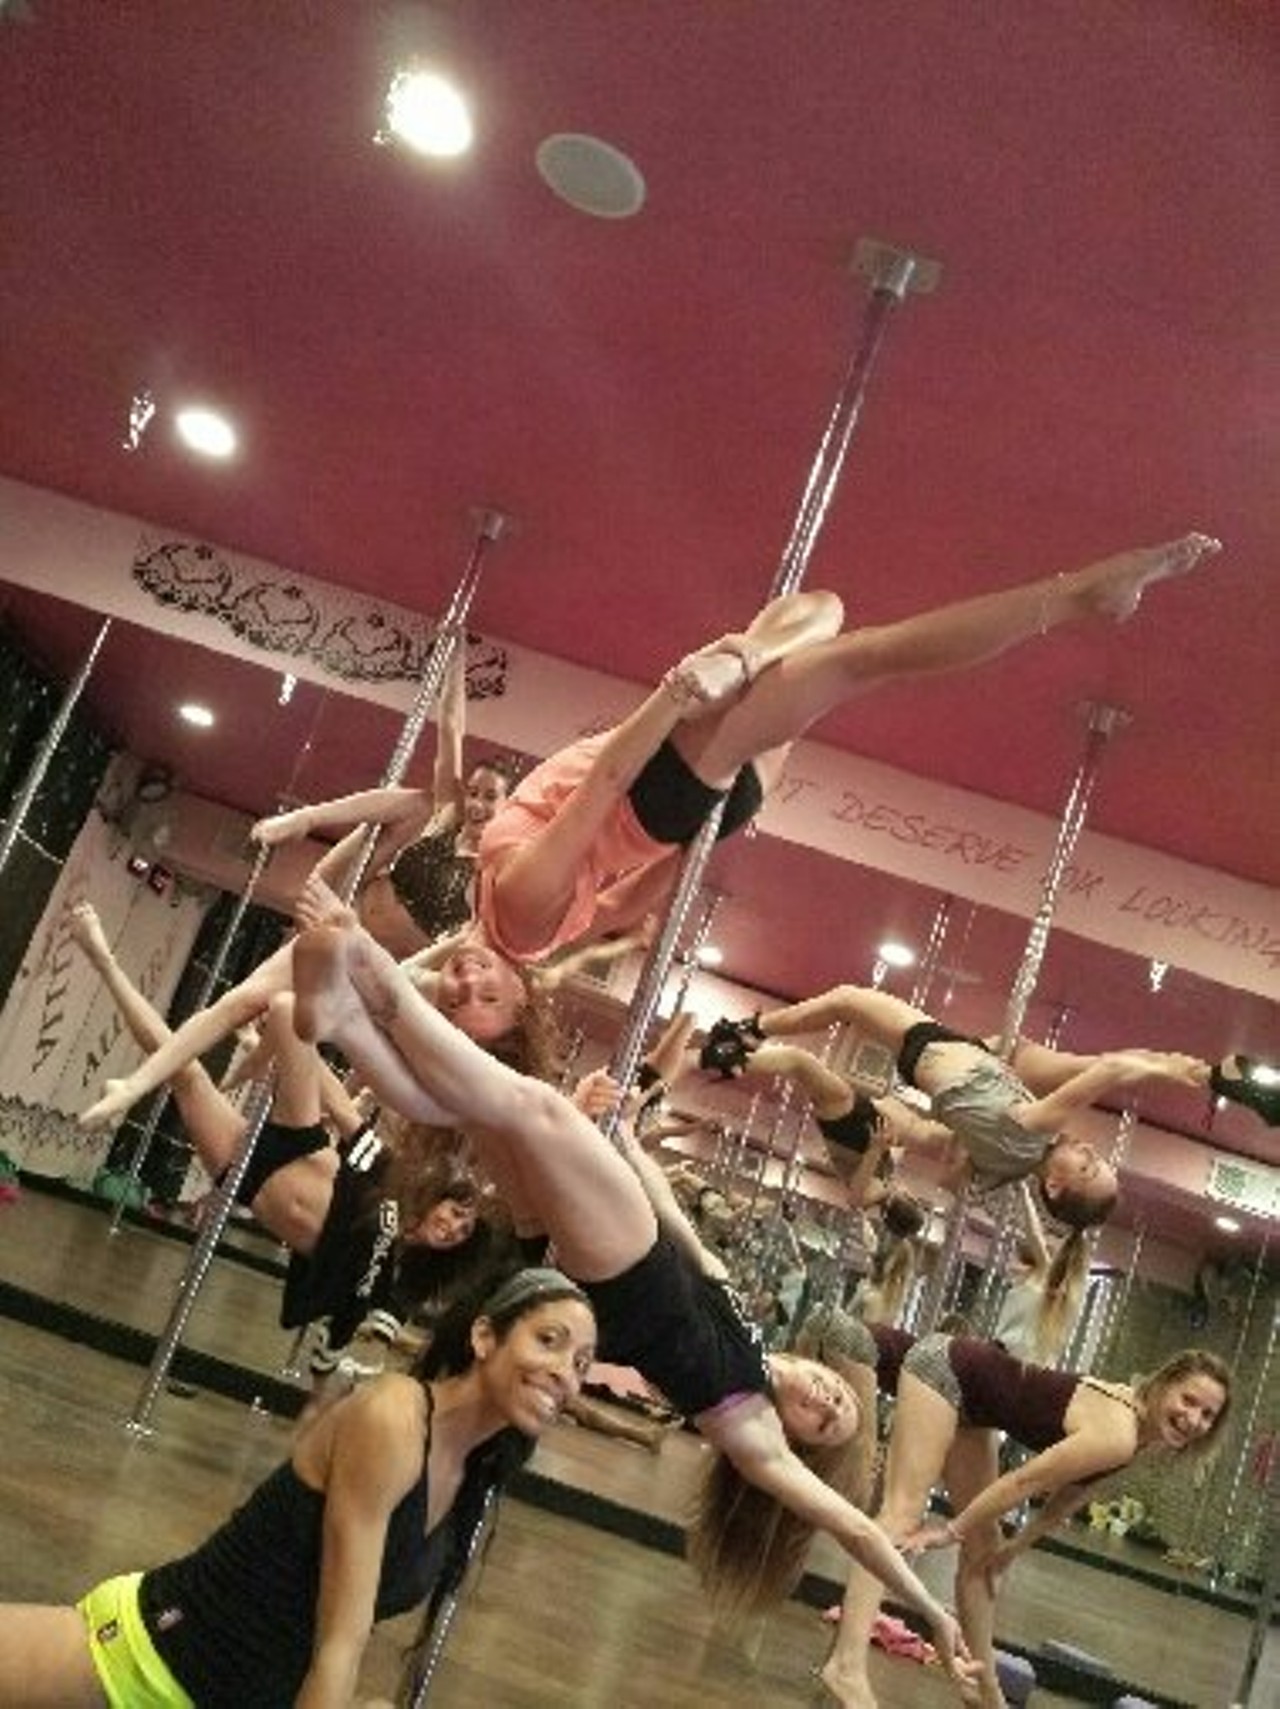  Give pole dancing a go
1313 Edgewater Drive, Orlando, 407-425-5873
Despite the stigma surrounding it, pole dancing is actually a legitimately trying workout. You&#146;re literally balancing your entire weight on a single pole. Allure Dance Studio provides women with a workout that will not only help you drop pounds, but also elevate your self-esteem. Individual classes cost $25. 
Photo via Allure Dance/Facebook